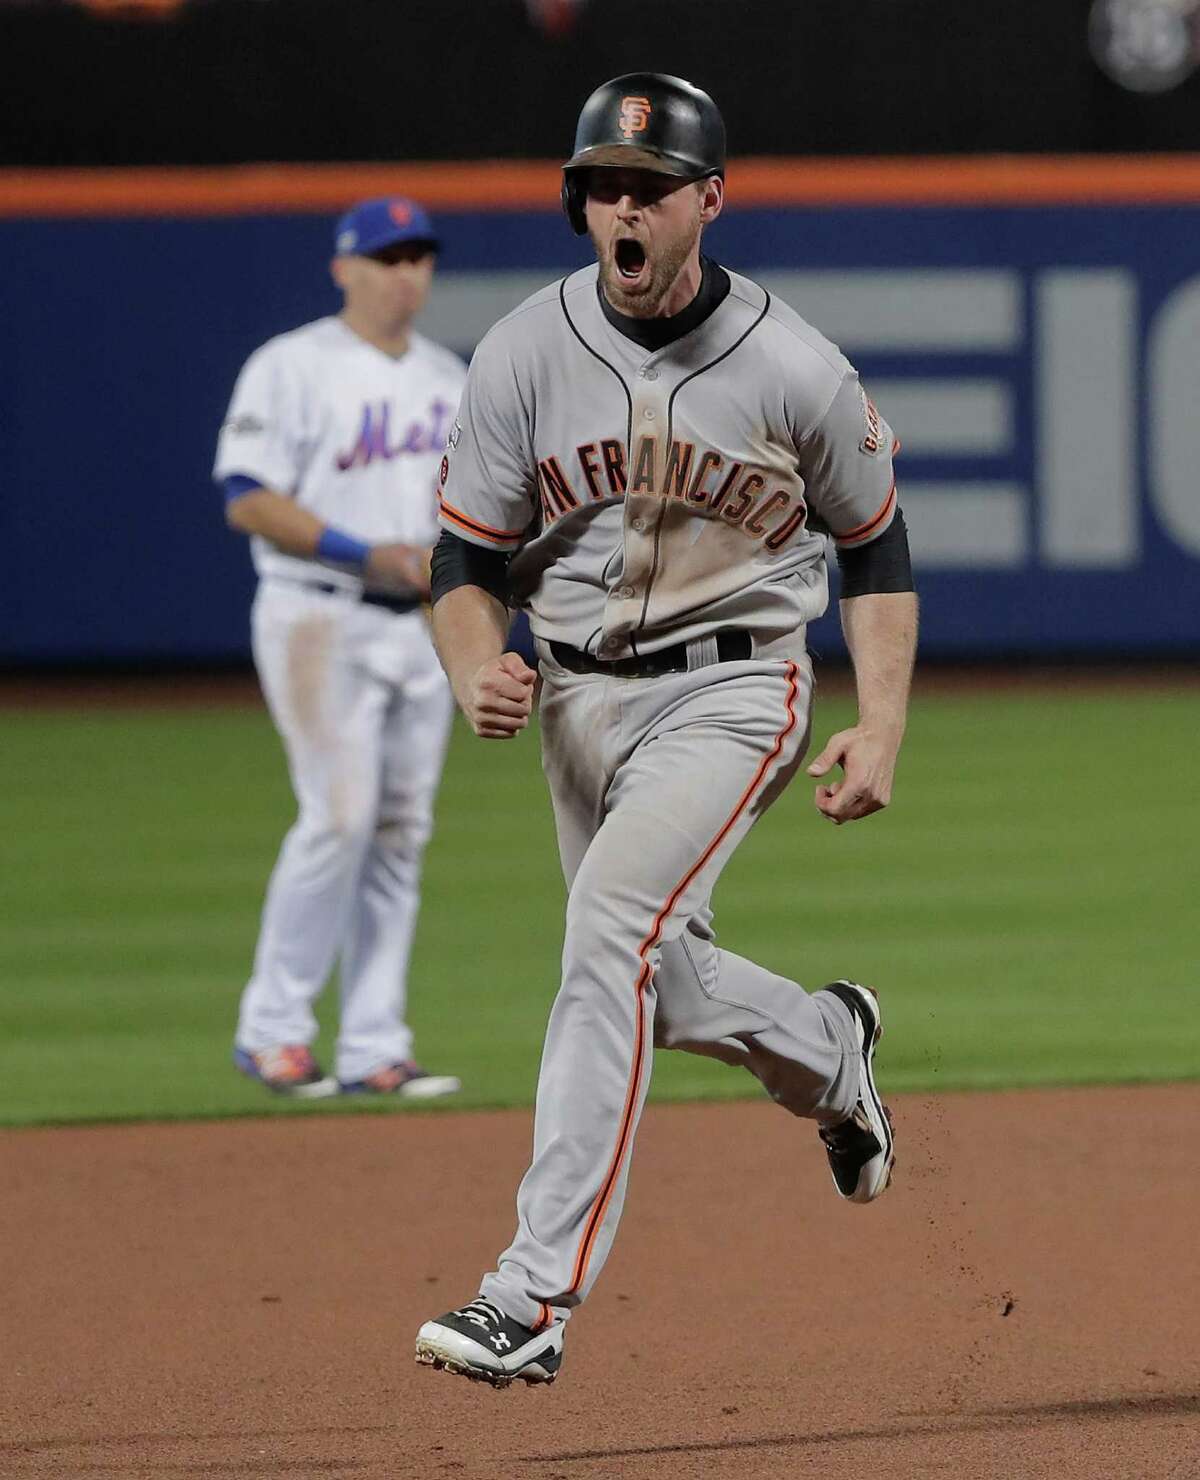 The Giants' heroes were unlikely and expected as No. 8 hitter Conor Gillaspie, left, smacked a three-run homer in the ninth inning to back the shutout pitching of postseason stalwart Madison Bumgarner.